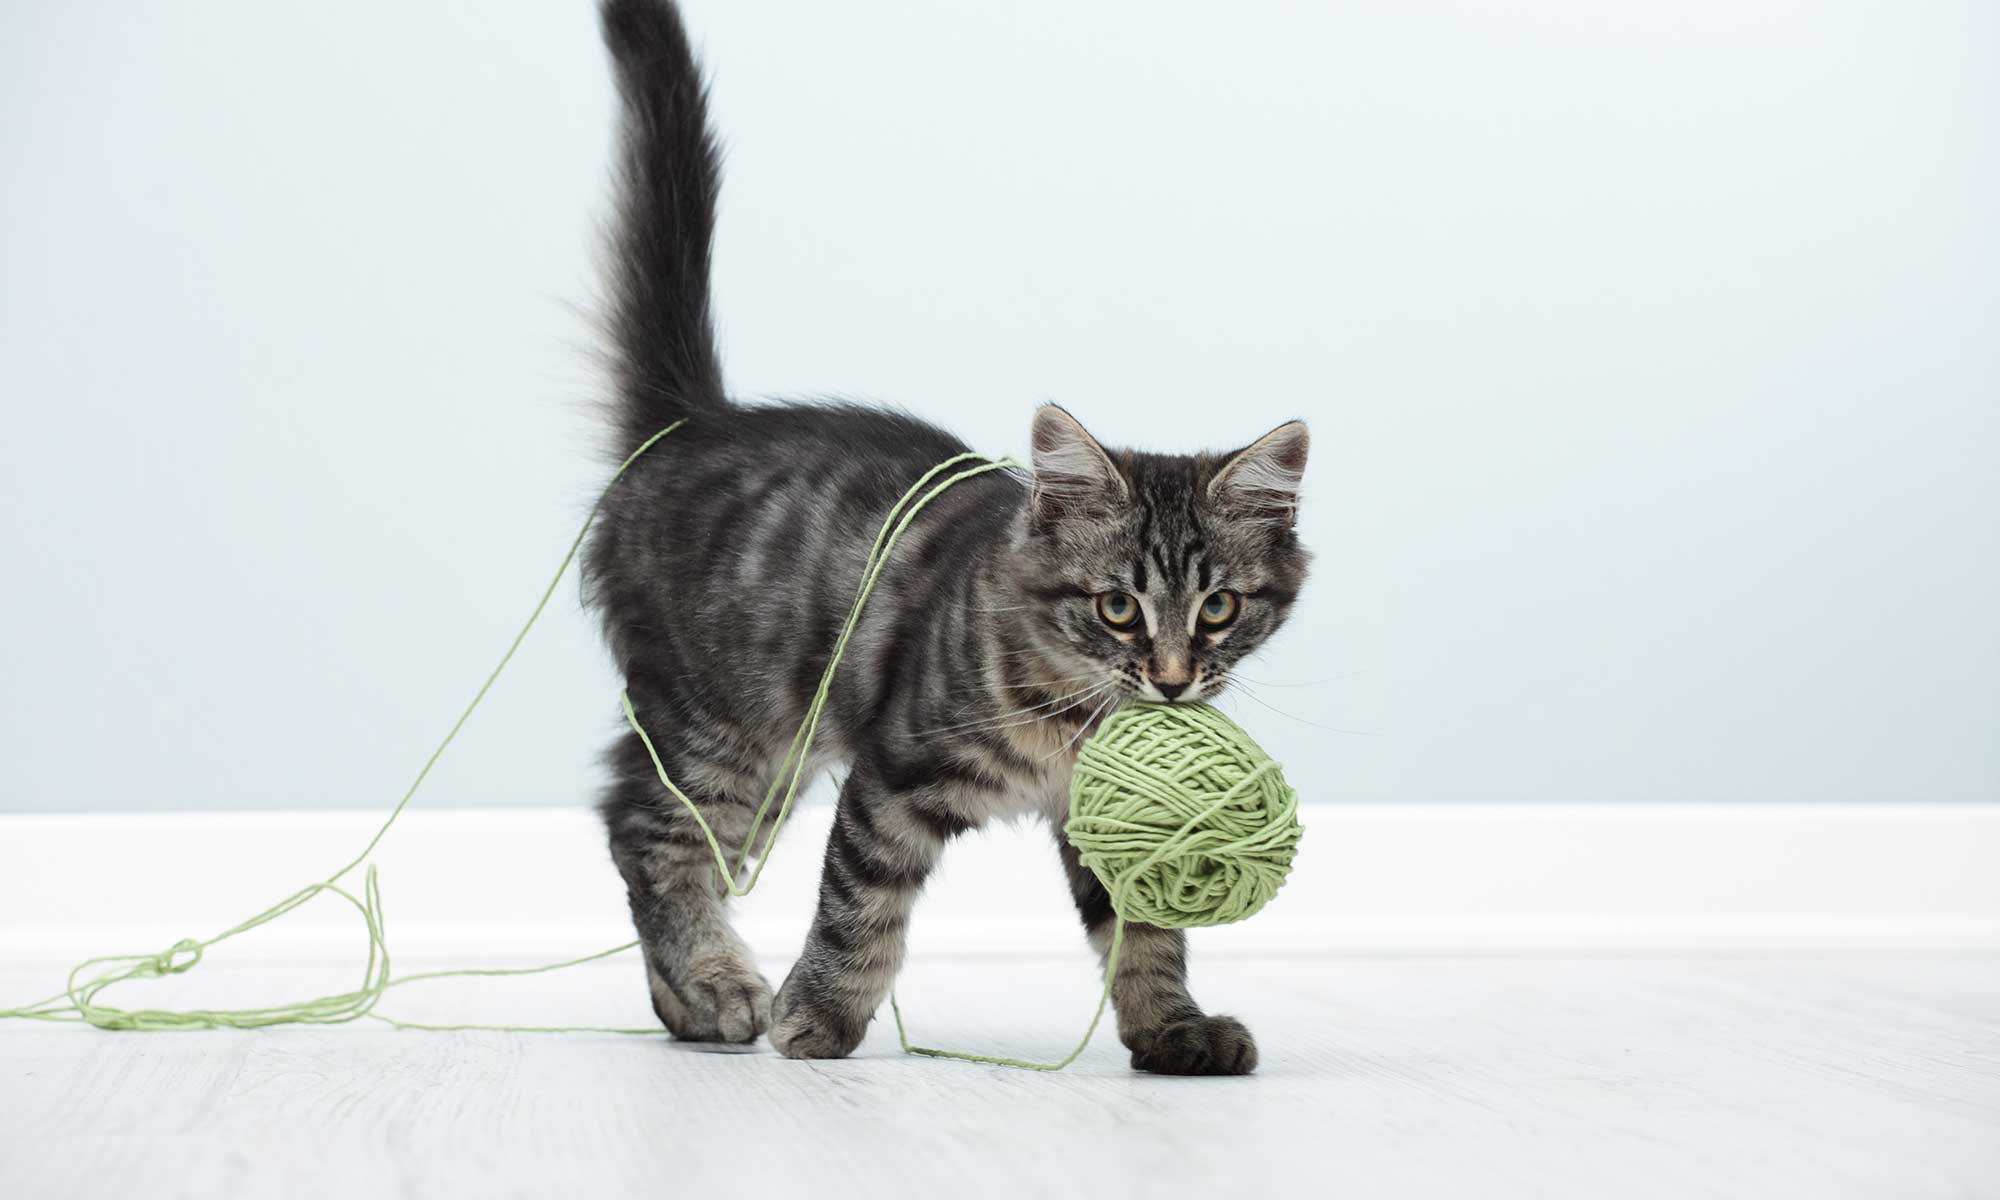 A kitten with a ball of twine